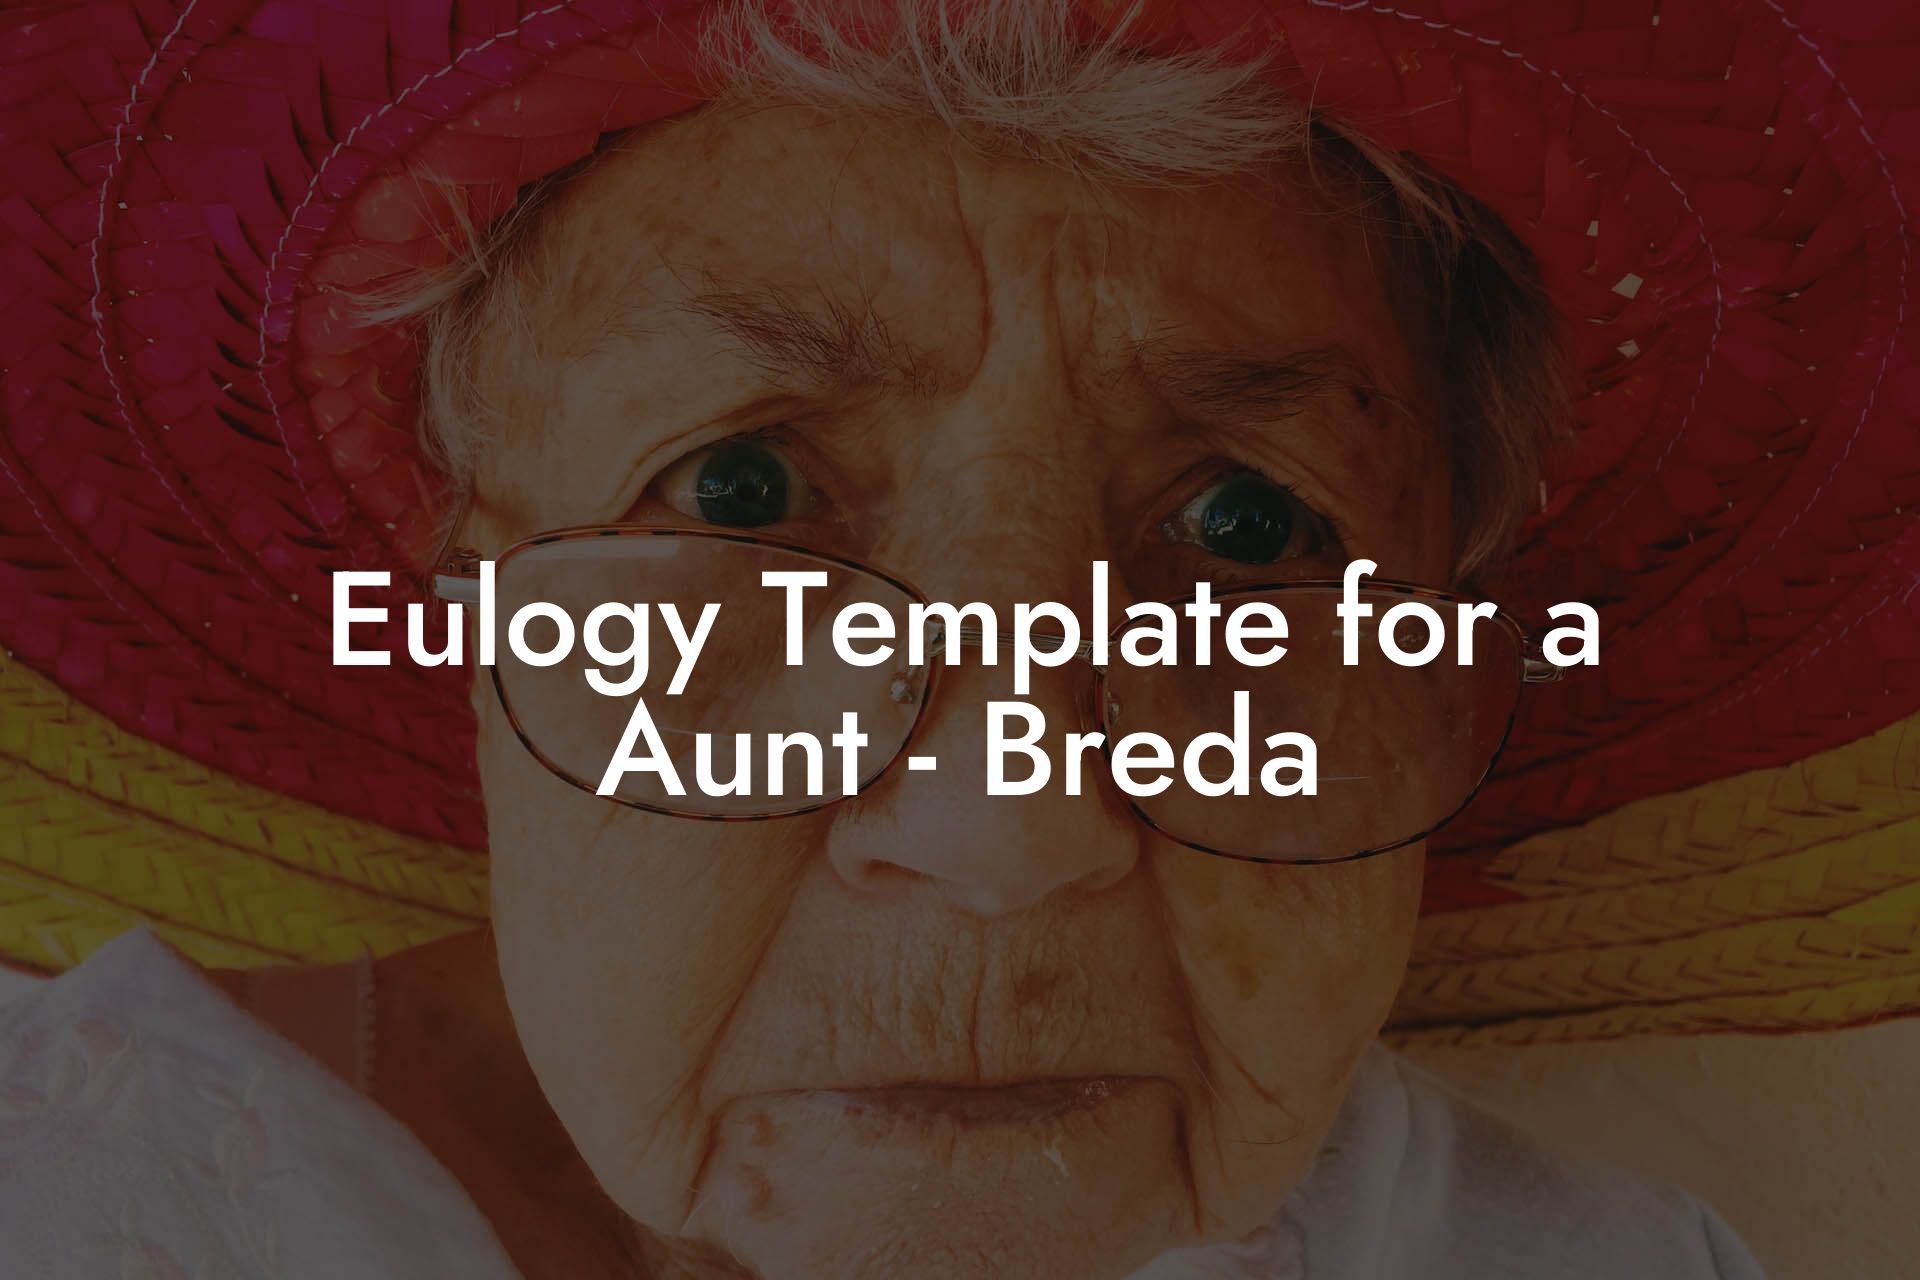 Eulogy Template for a Aunt - Breda